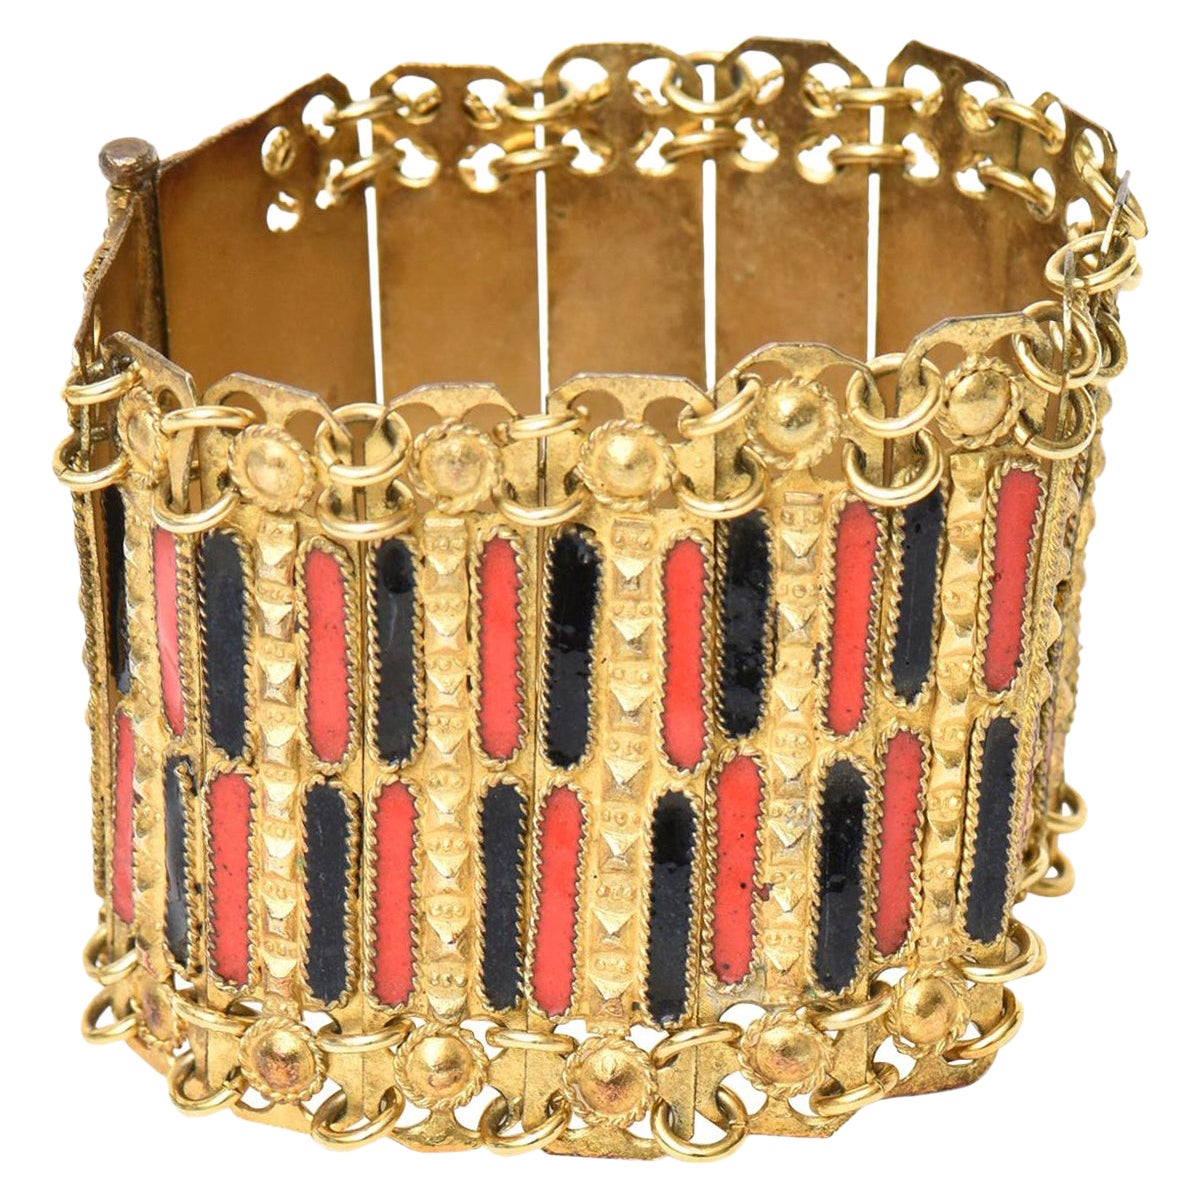  Vintage Grecian Gold Plated Metal With Red And Black Enamel Cuff Bracelet For Sale